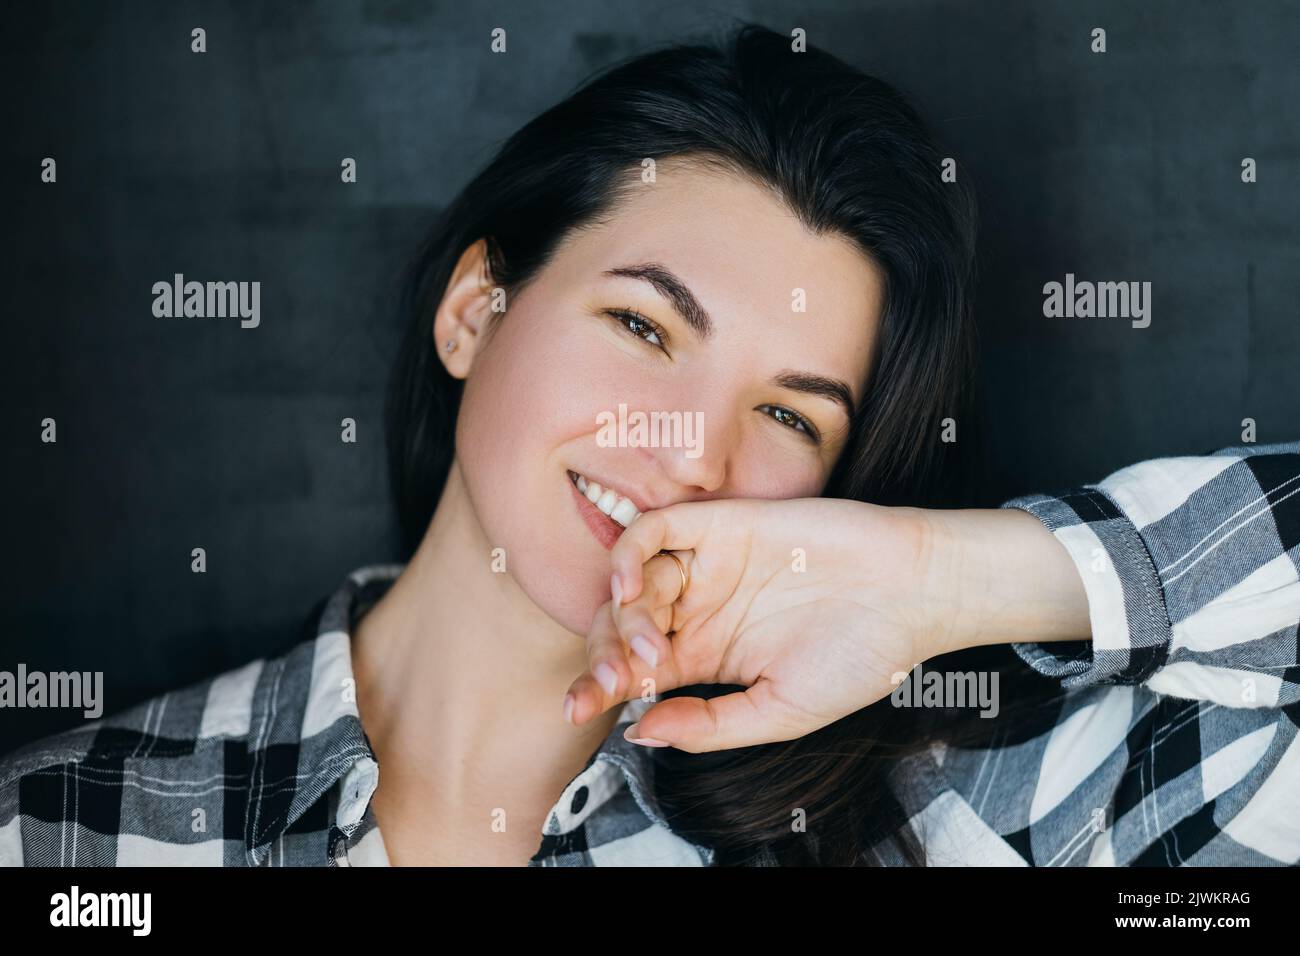 young woman relaxed happy friendly brunette Stock Photo